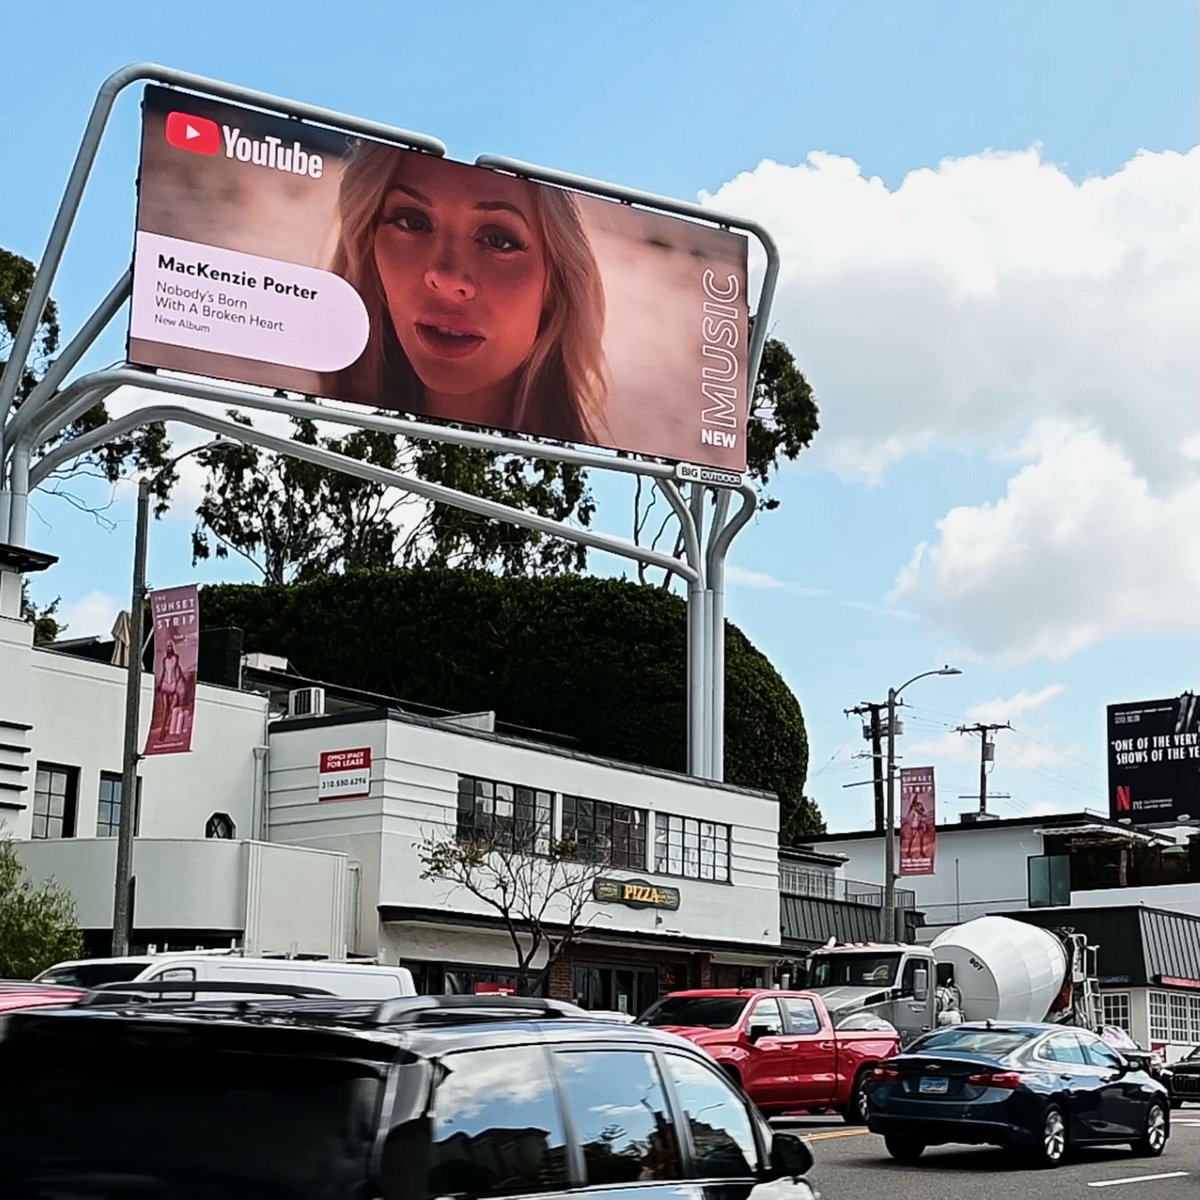 Look mom 🥹🥹 … also Bowie look, it’s mom 🥹 Thank you @youtubemusic ❤️ Listen to the album on #YouTubeMusic: mackenzieporter.lnk.to/NBWABH/youtube…